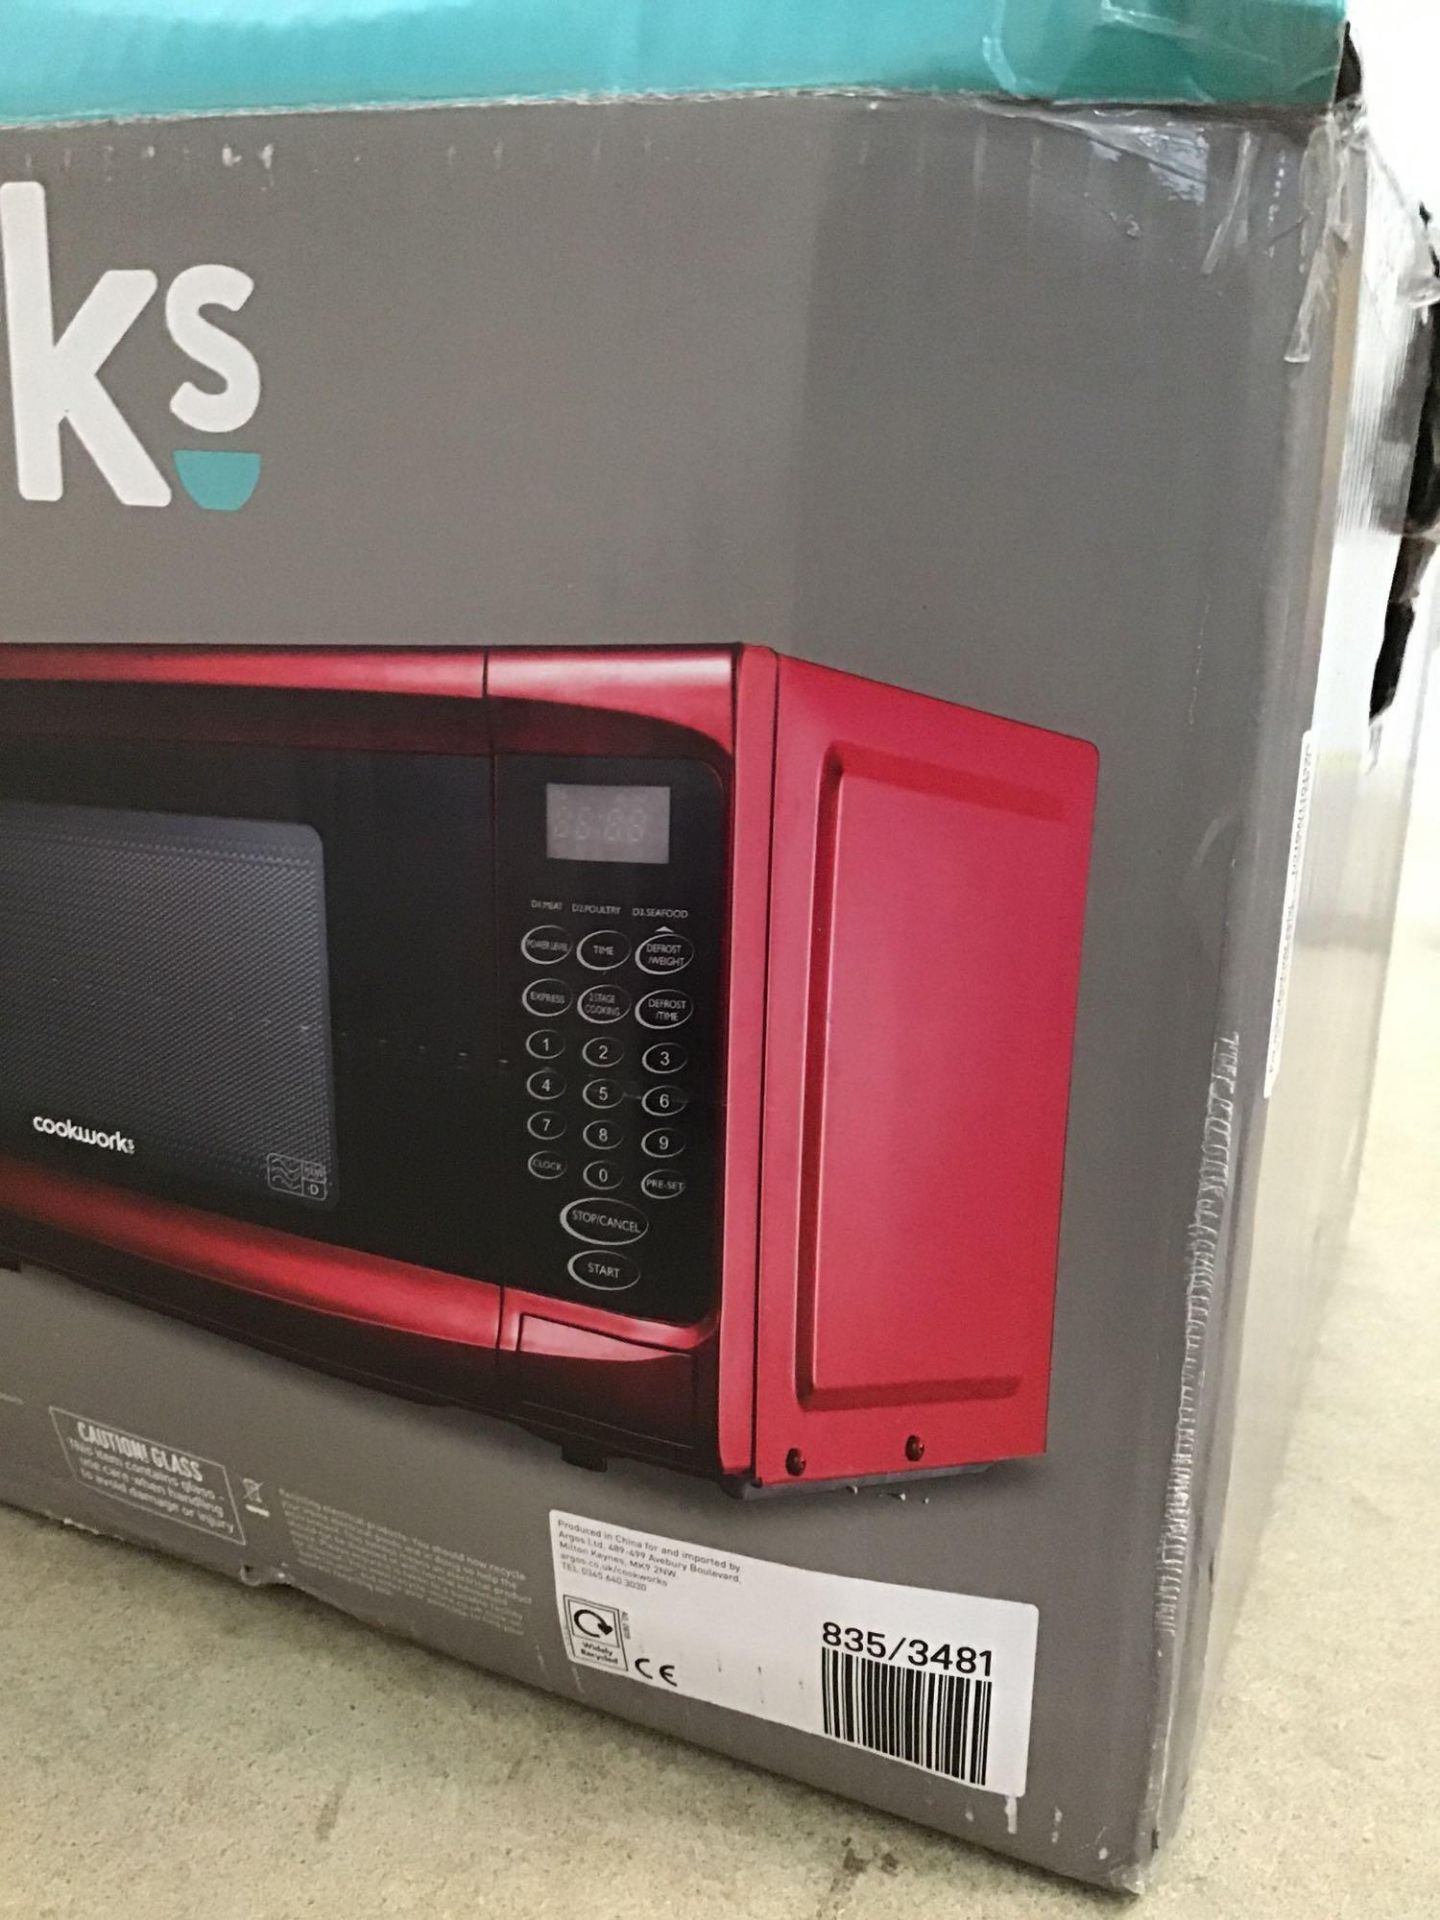 Cookworks 700W Standard Microwave P70B - Red - £54.99 RRP - Image 4 of 5